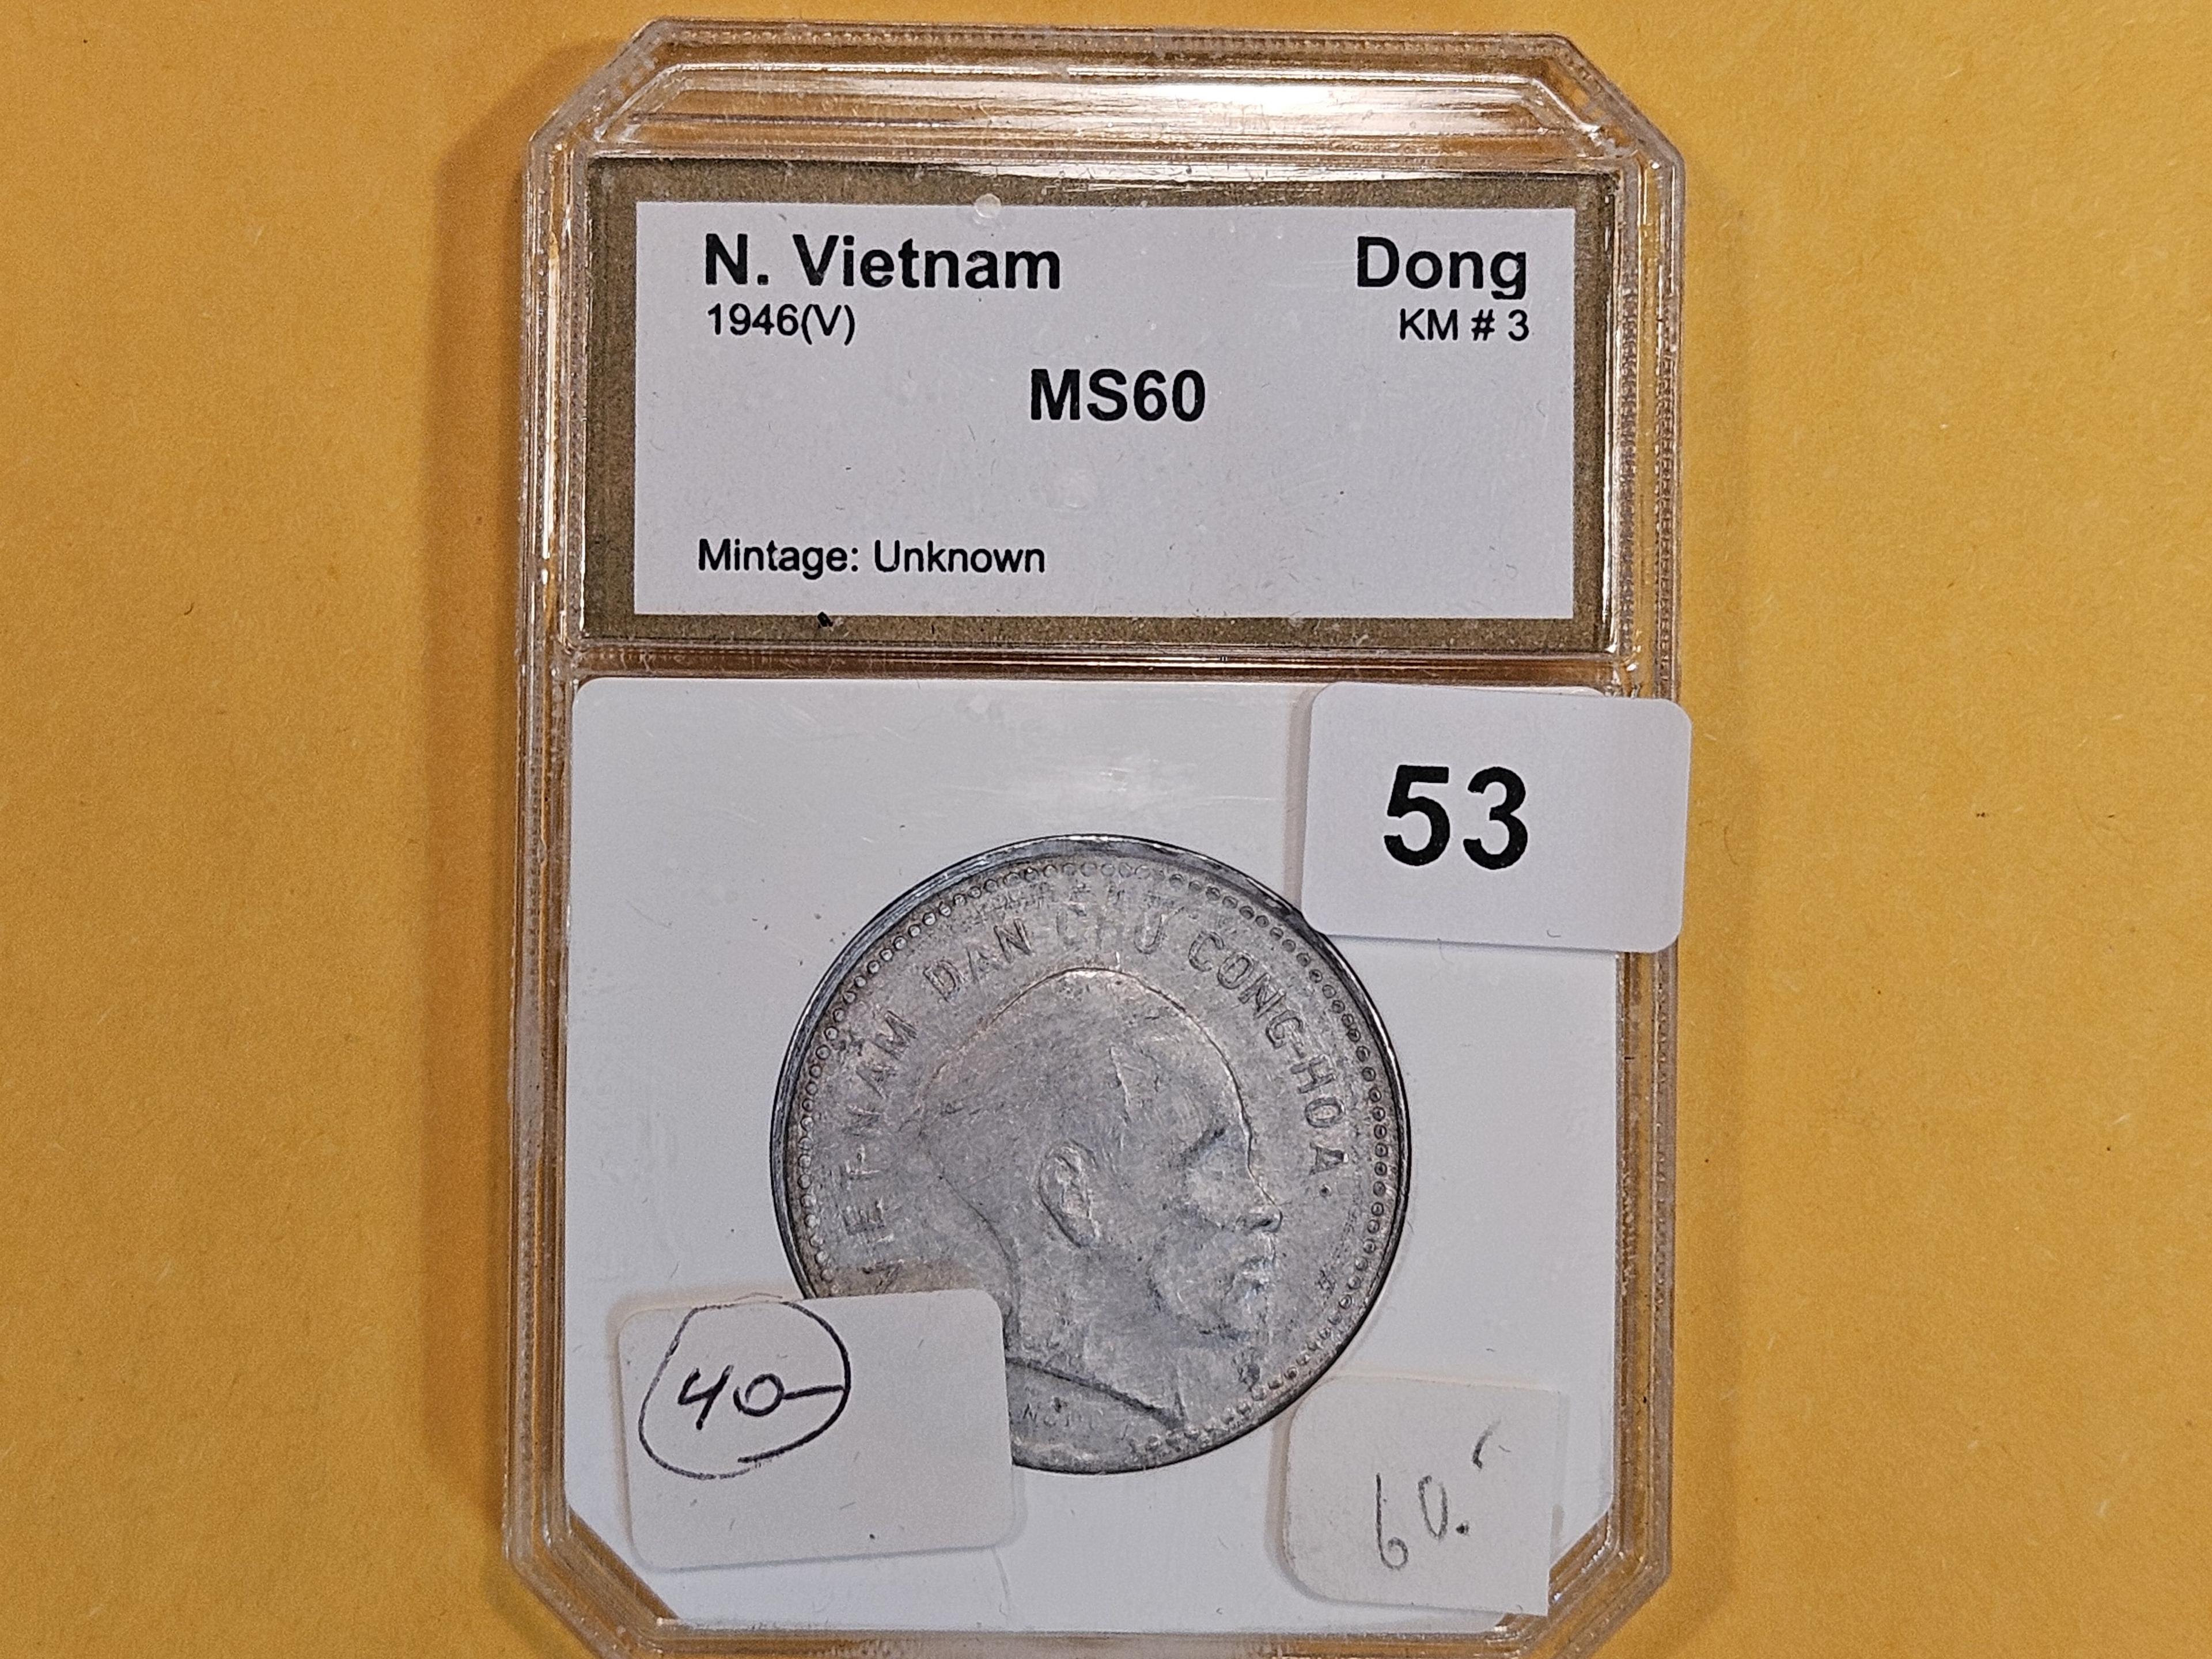 PCI 1946(V) North Vietnam Dong in Mint State 60